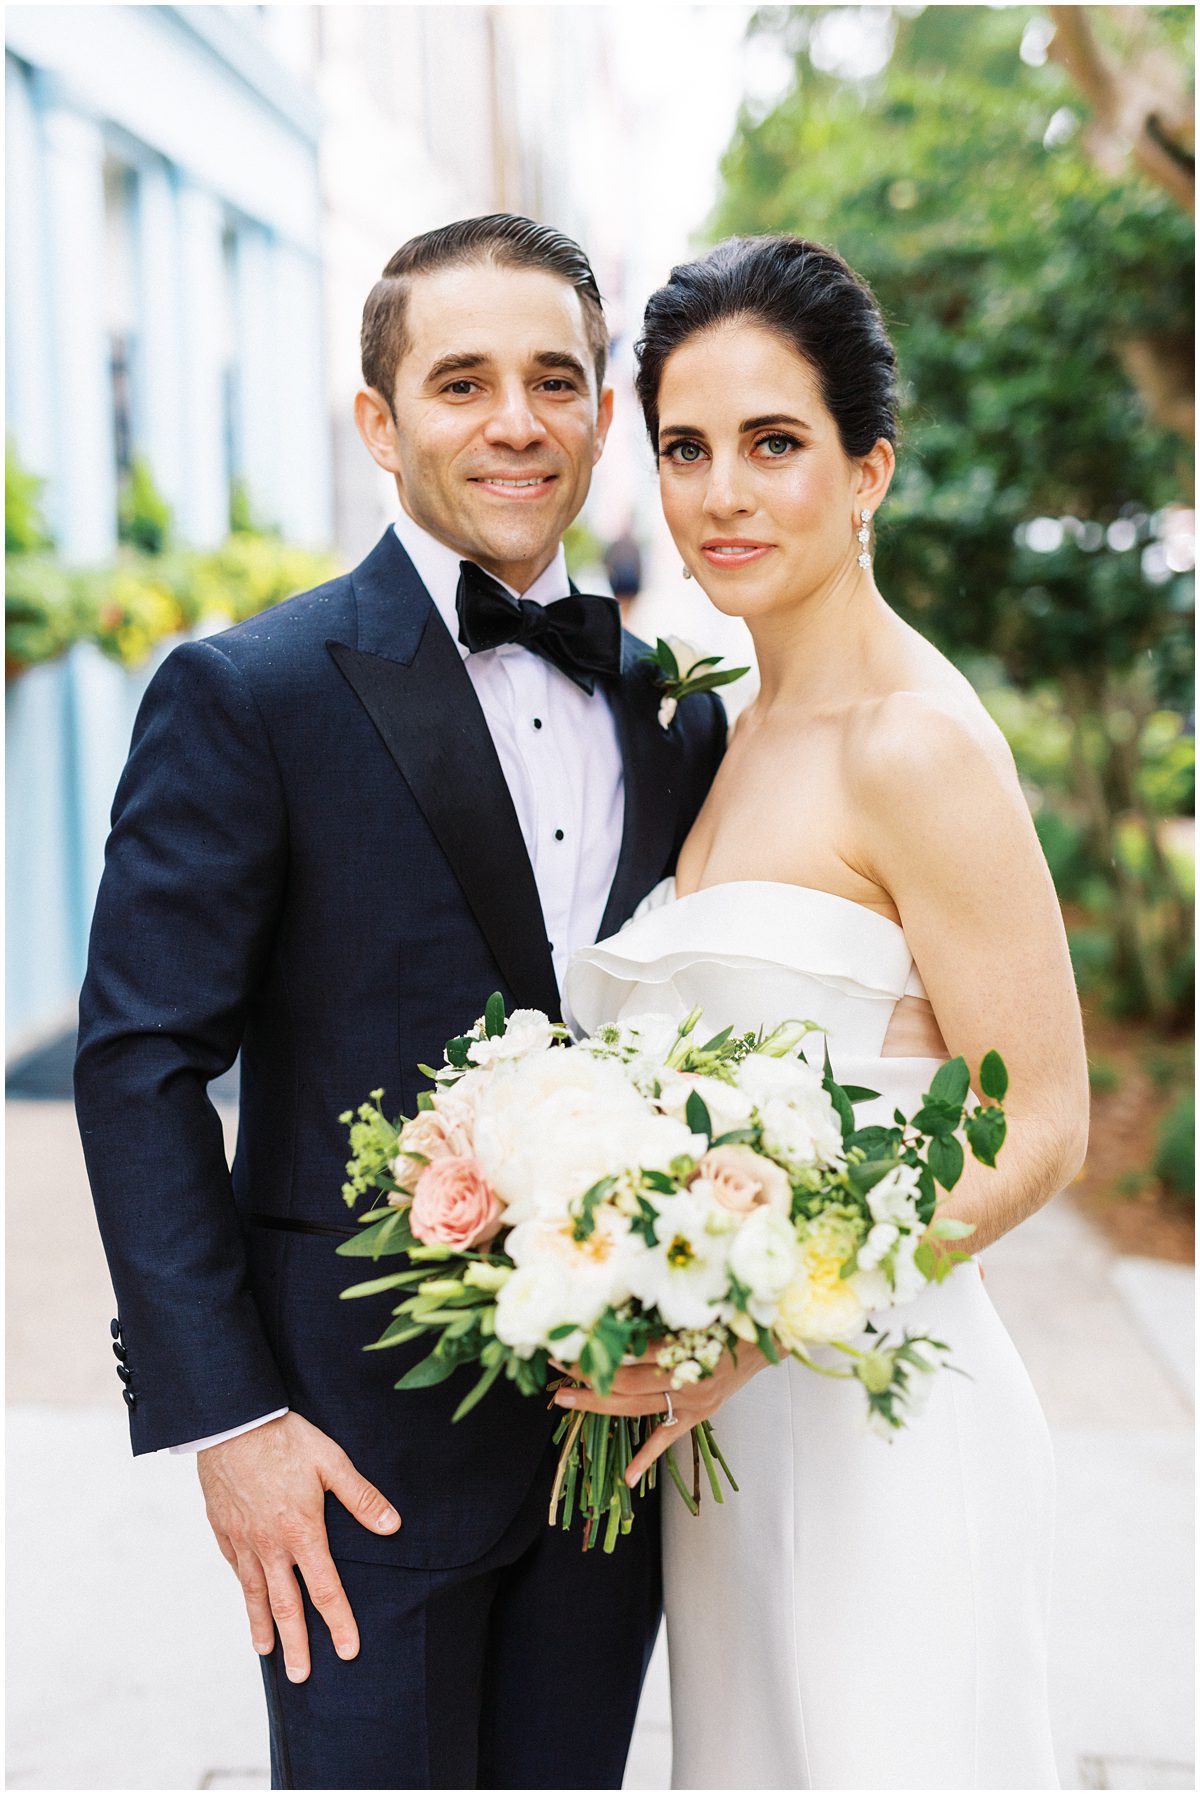 A modern bride and groom from NYC throwing their wedding in Charleston SC